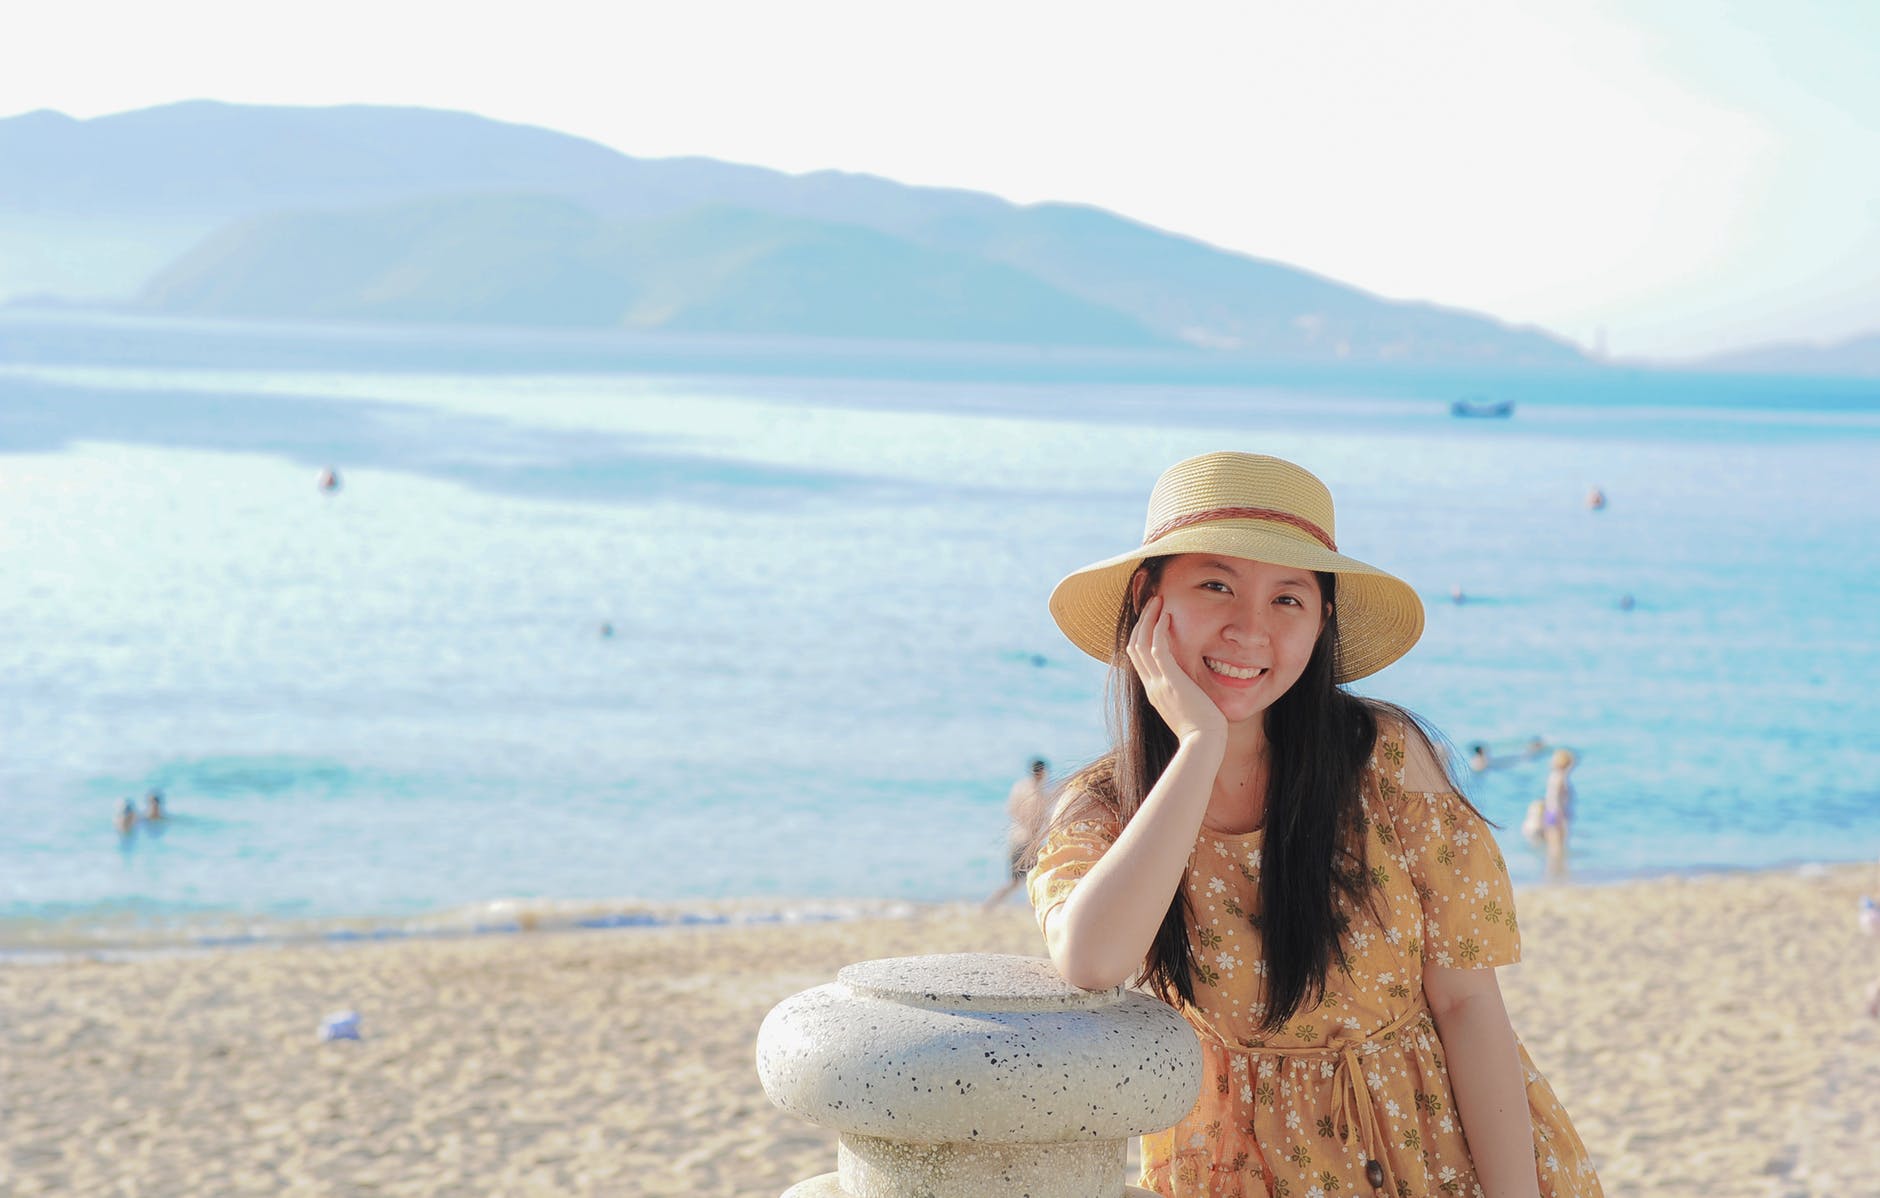 Woman Wearing Yellow Floral Dress and Sun Hat on Beach, Woman Wearing Yellow Floral Dress and Sun Hat on Beach